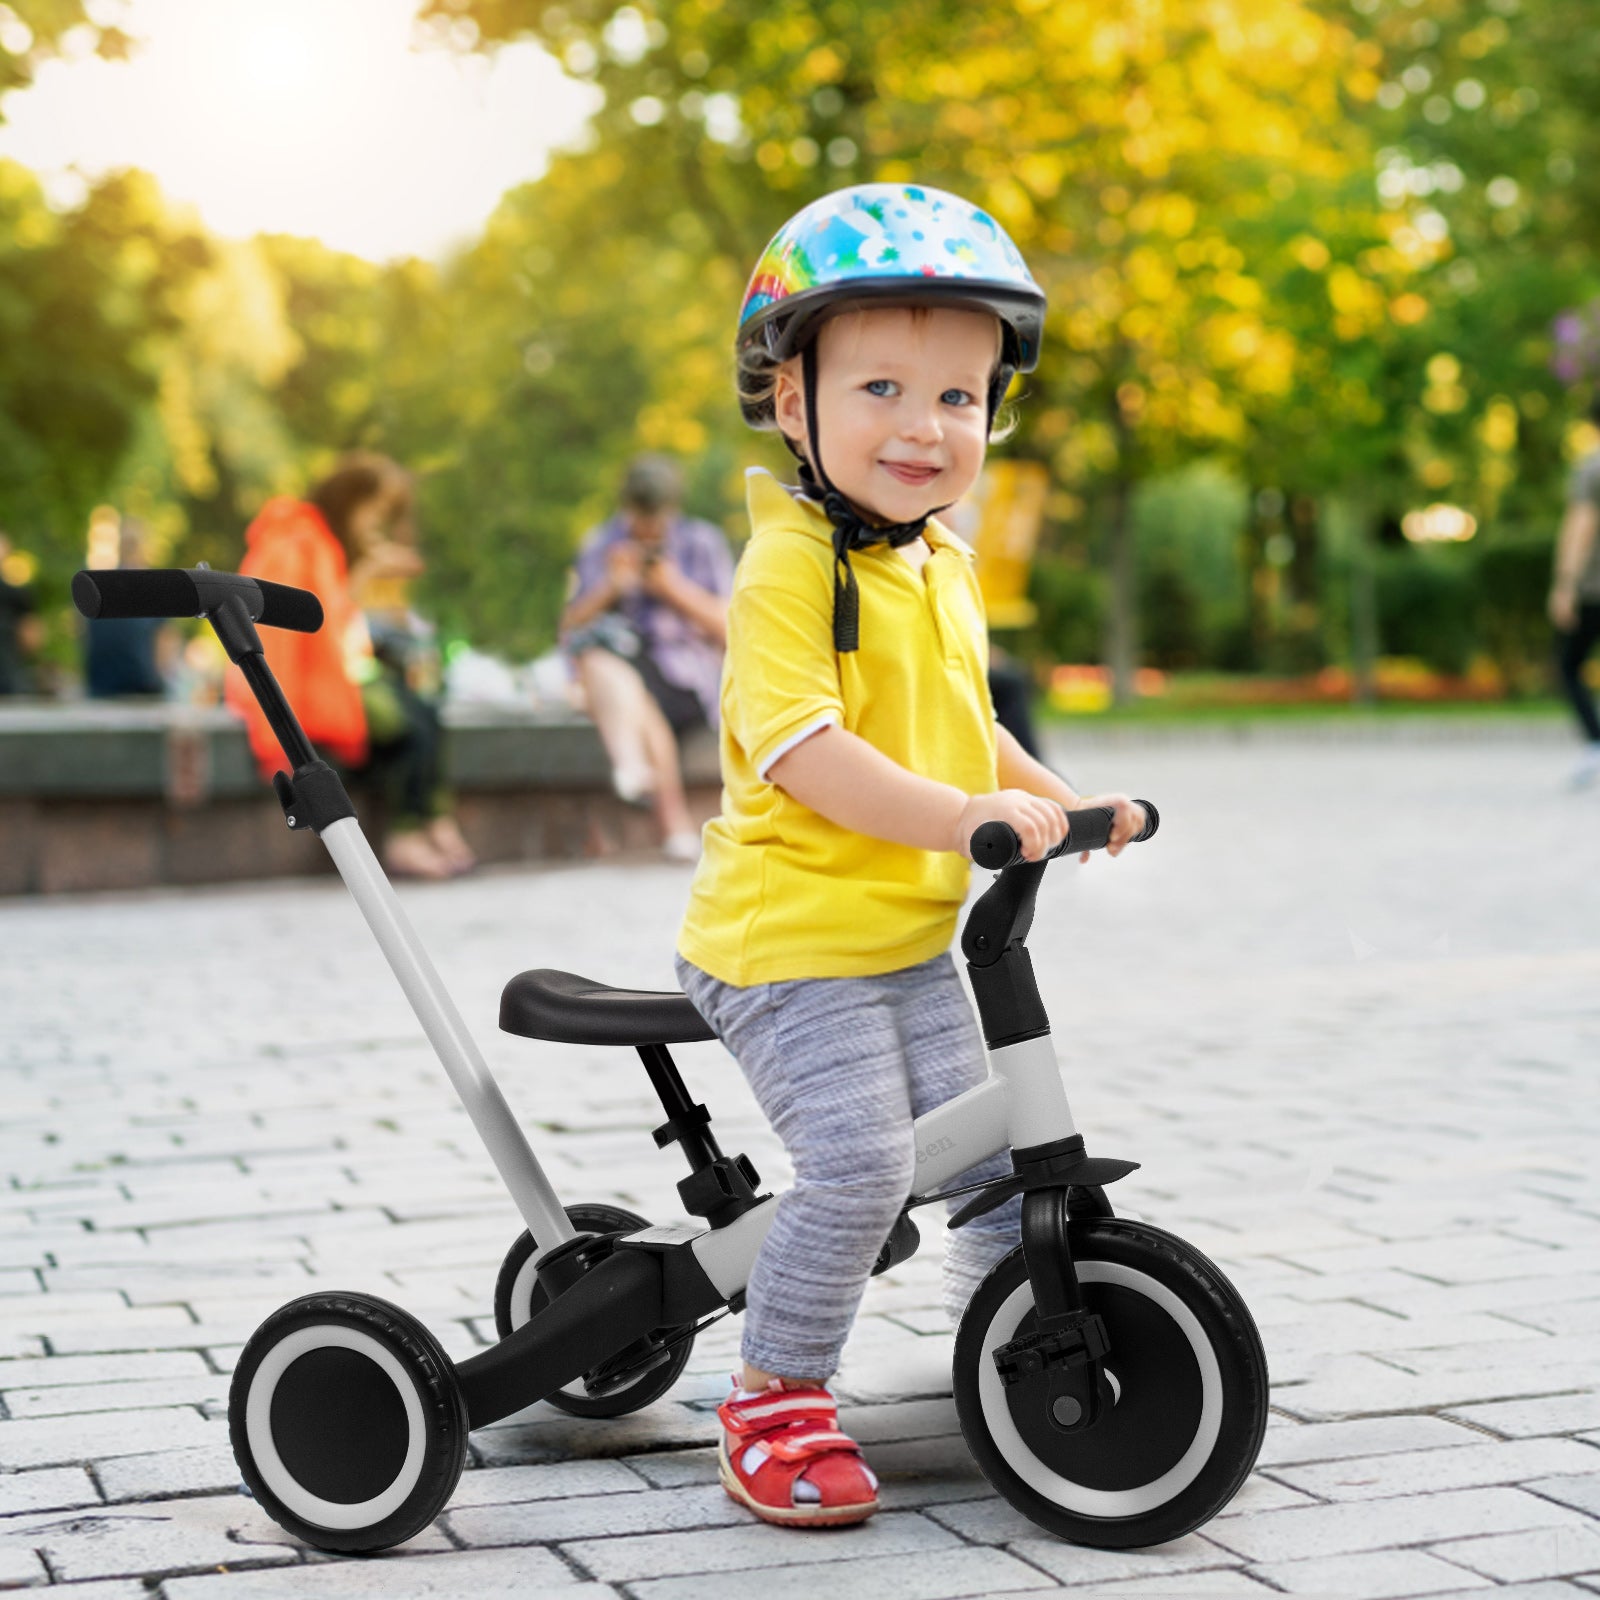 4-in-1-Children-s-Tricycle-Bike-Balance-Bike-Balance-Bike-with-Push-Bar-for-Boys-Girls-from-1-to-3-Years-Load-25-kg-Gray-4-in-1-Children-s-Tricycle-Bike-Gray